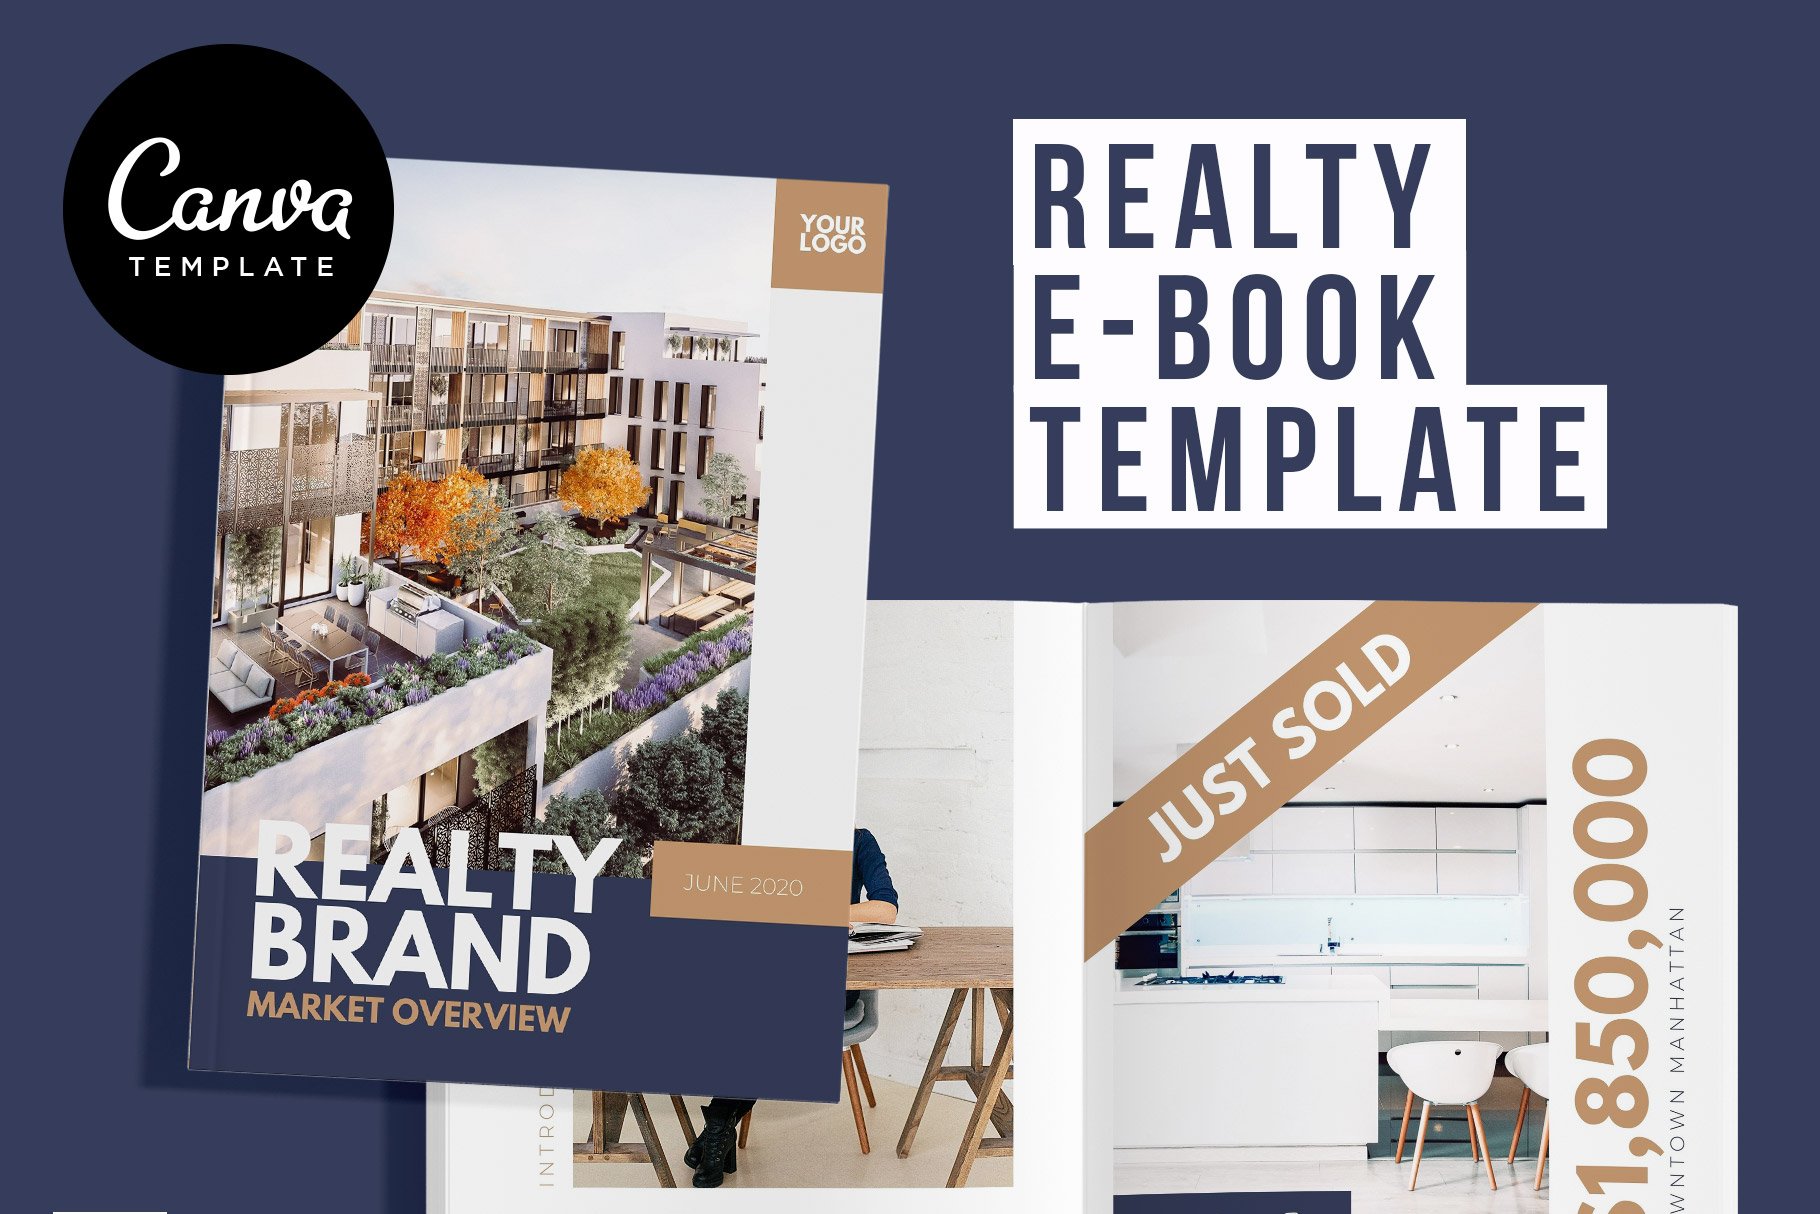 Real Estate eBook Canva Template cover image.